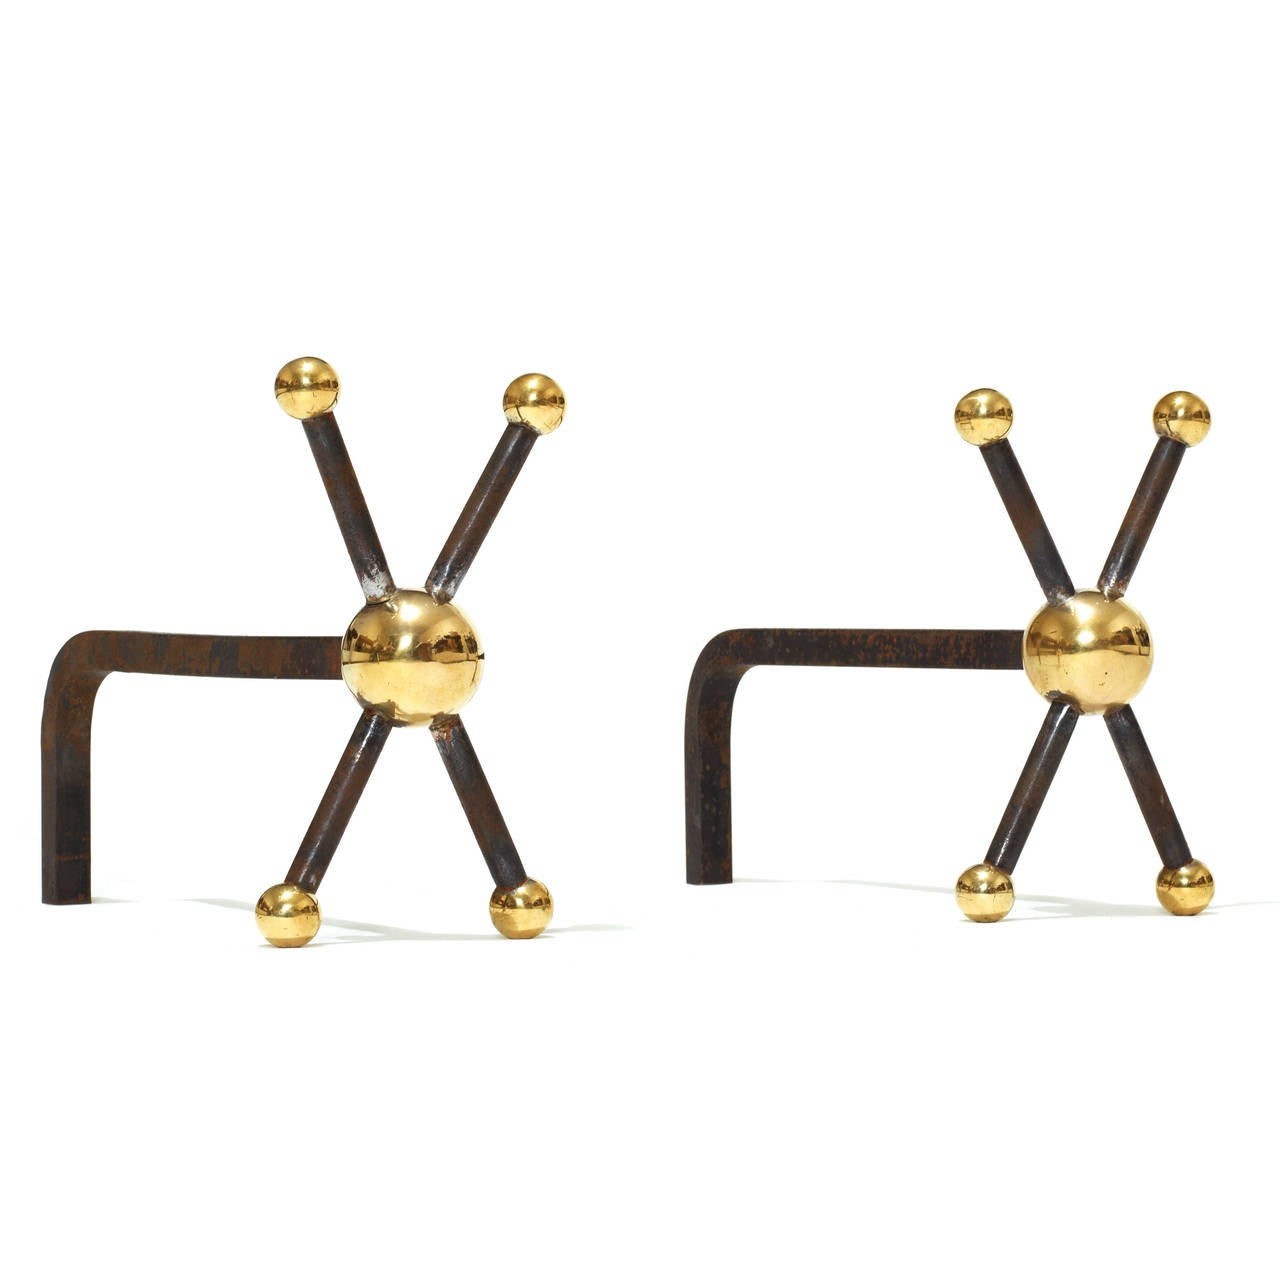 Rare pair of andirons with brass spheres arranged in a quincunx formation by Jean Royère (1902-1984), in wrought iron and brass.